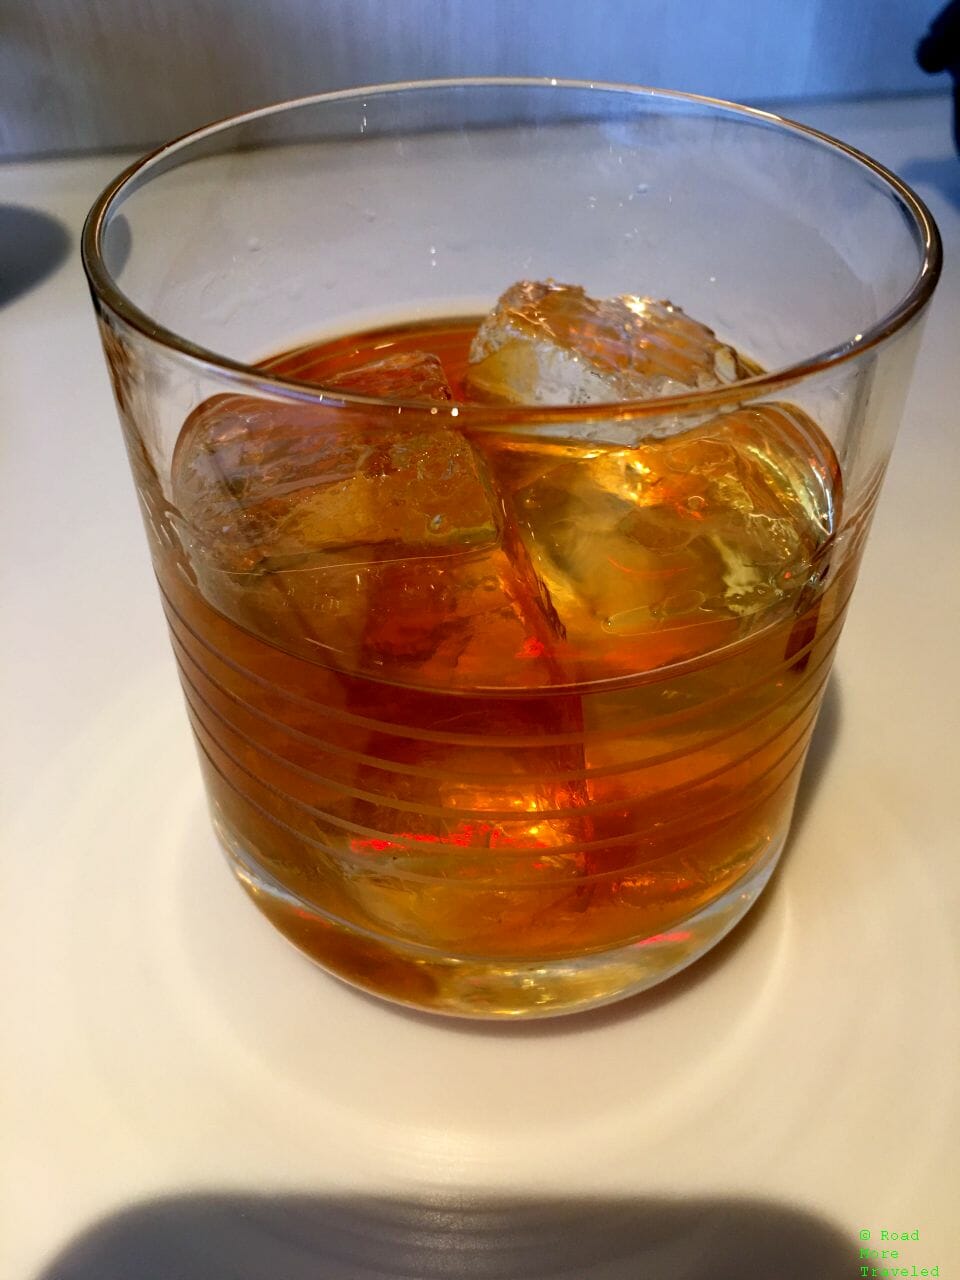 Capital One Lounge DFW Airport - butter pecan old fashioned